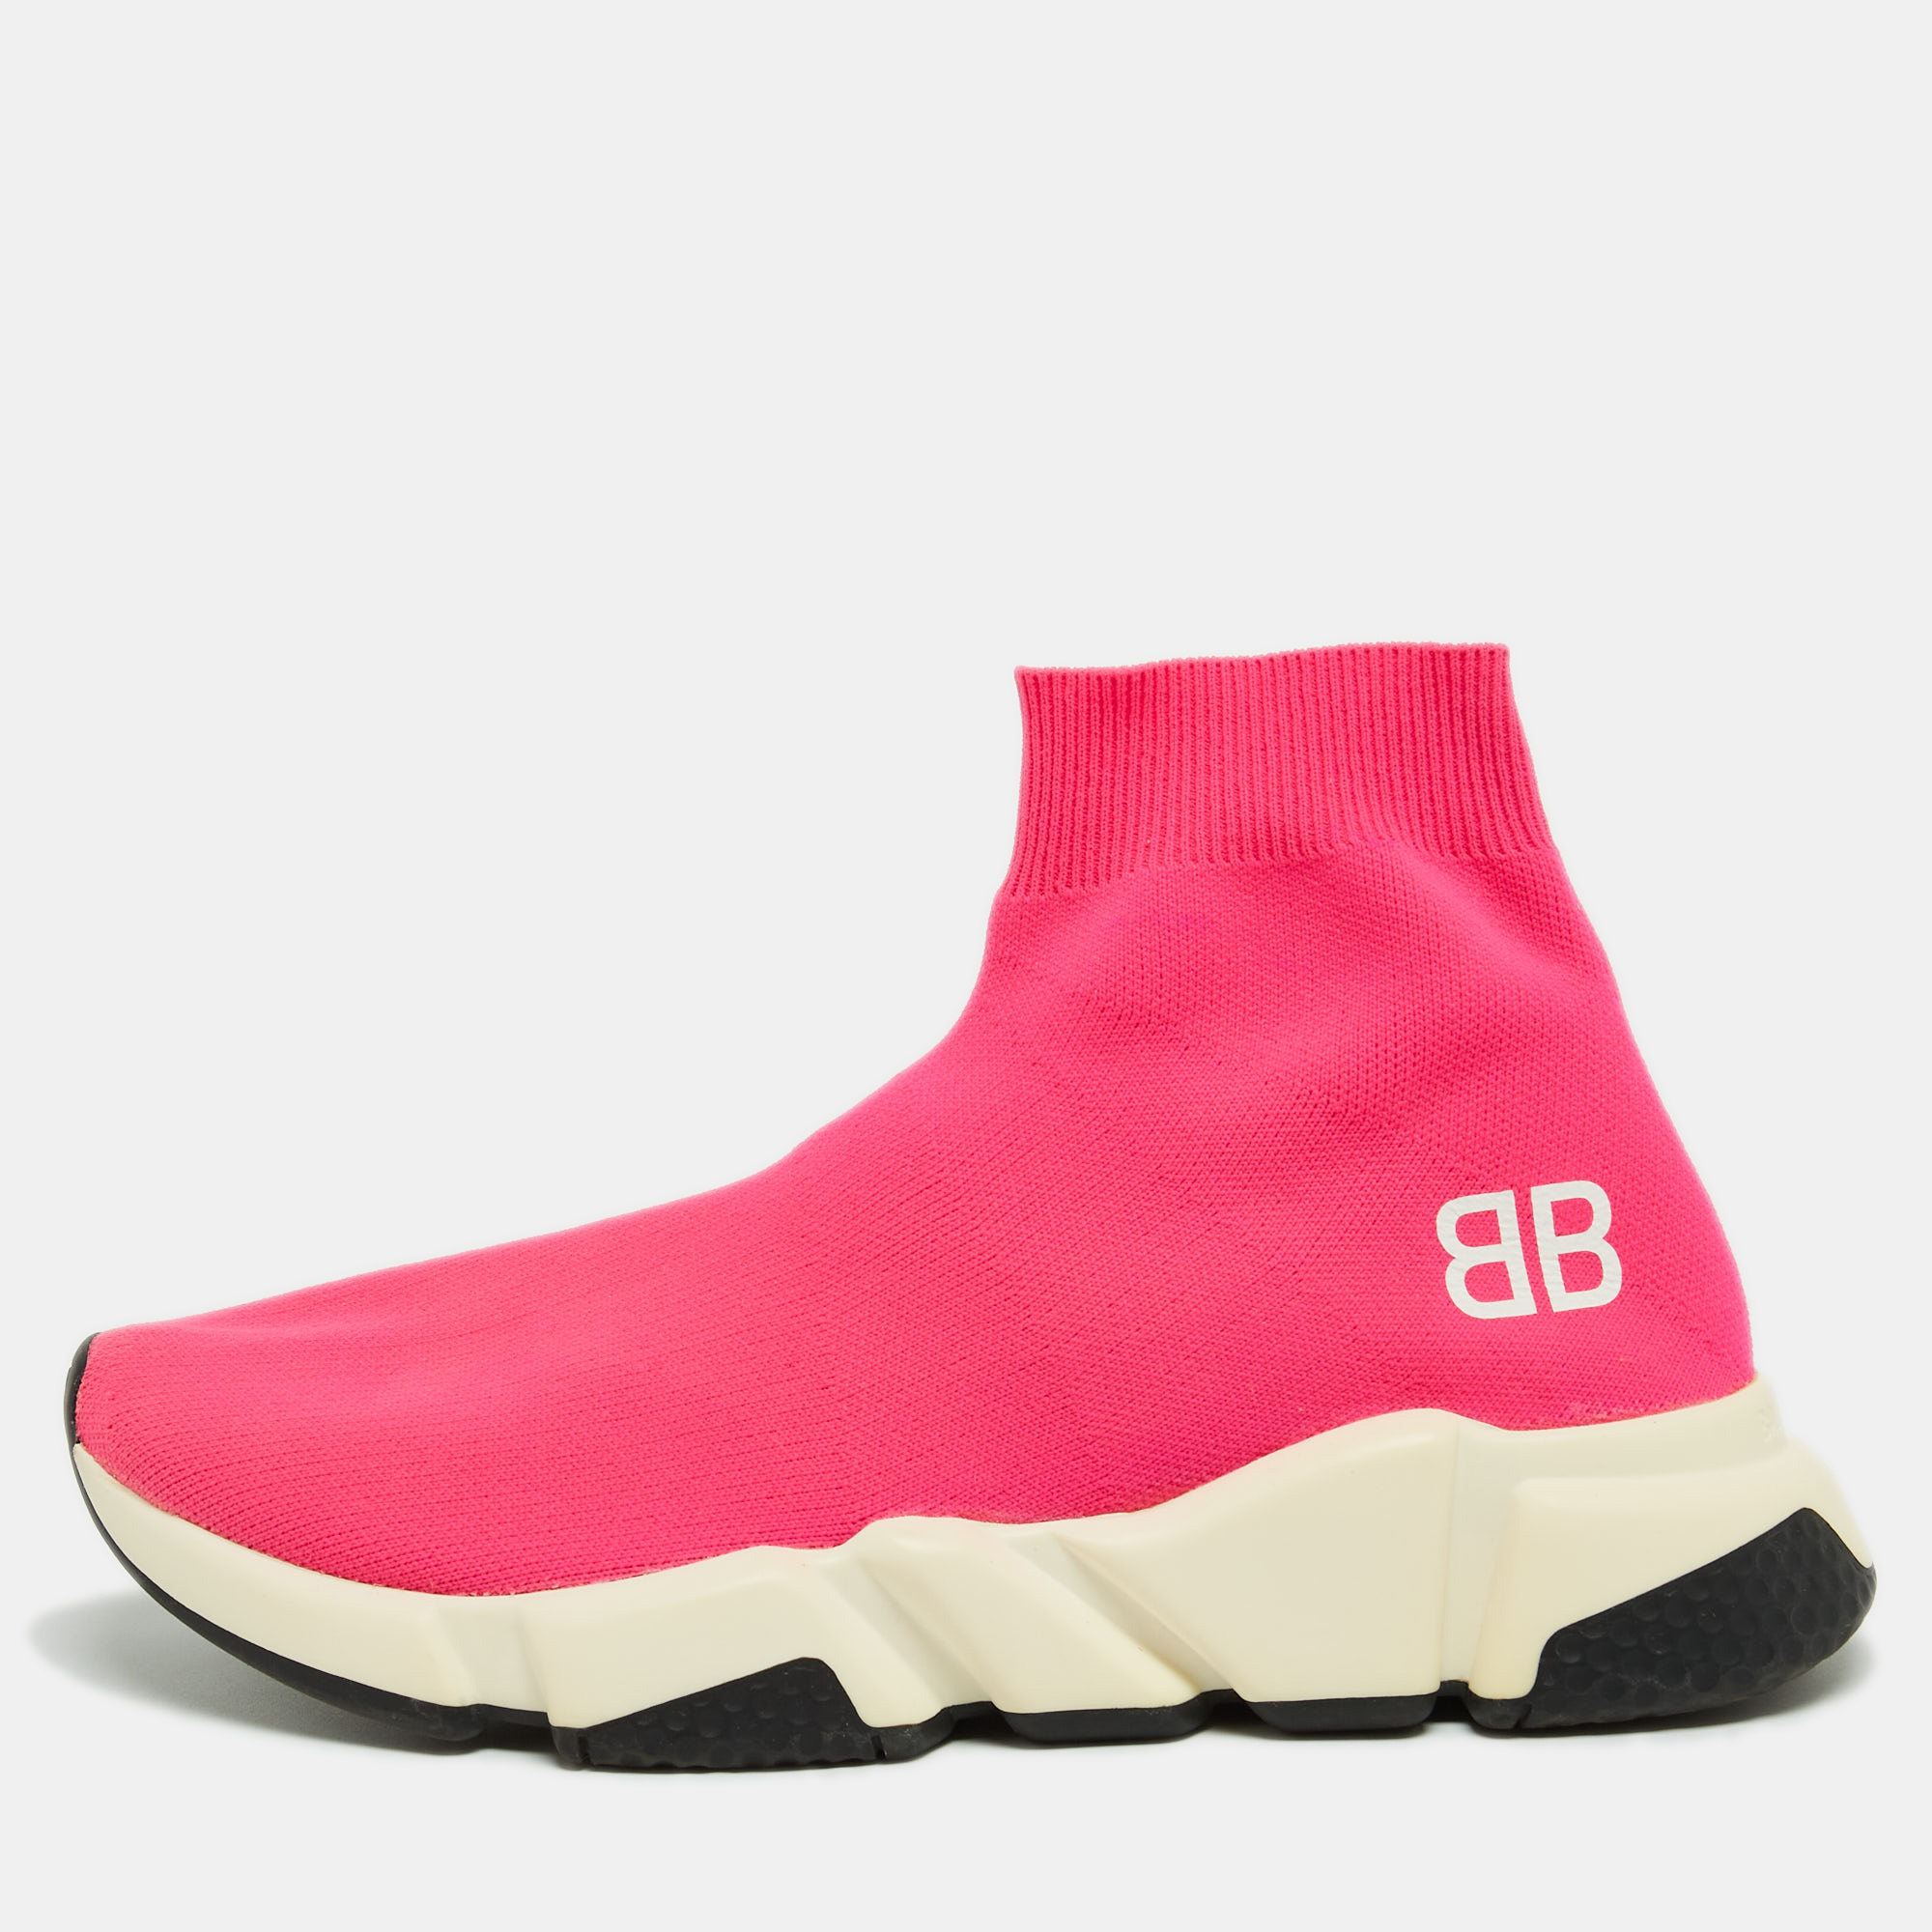 Balenciaga Neon Pink Knit Fabric Speed Trainer Sneakers Size 38